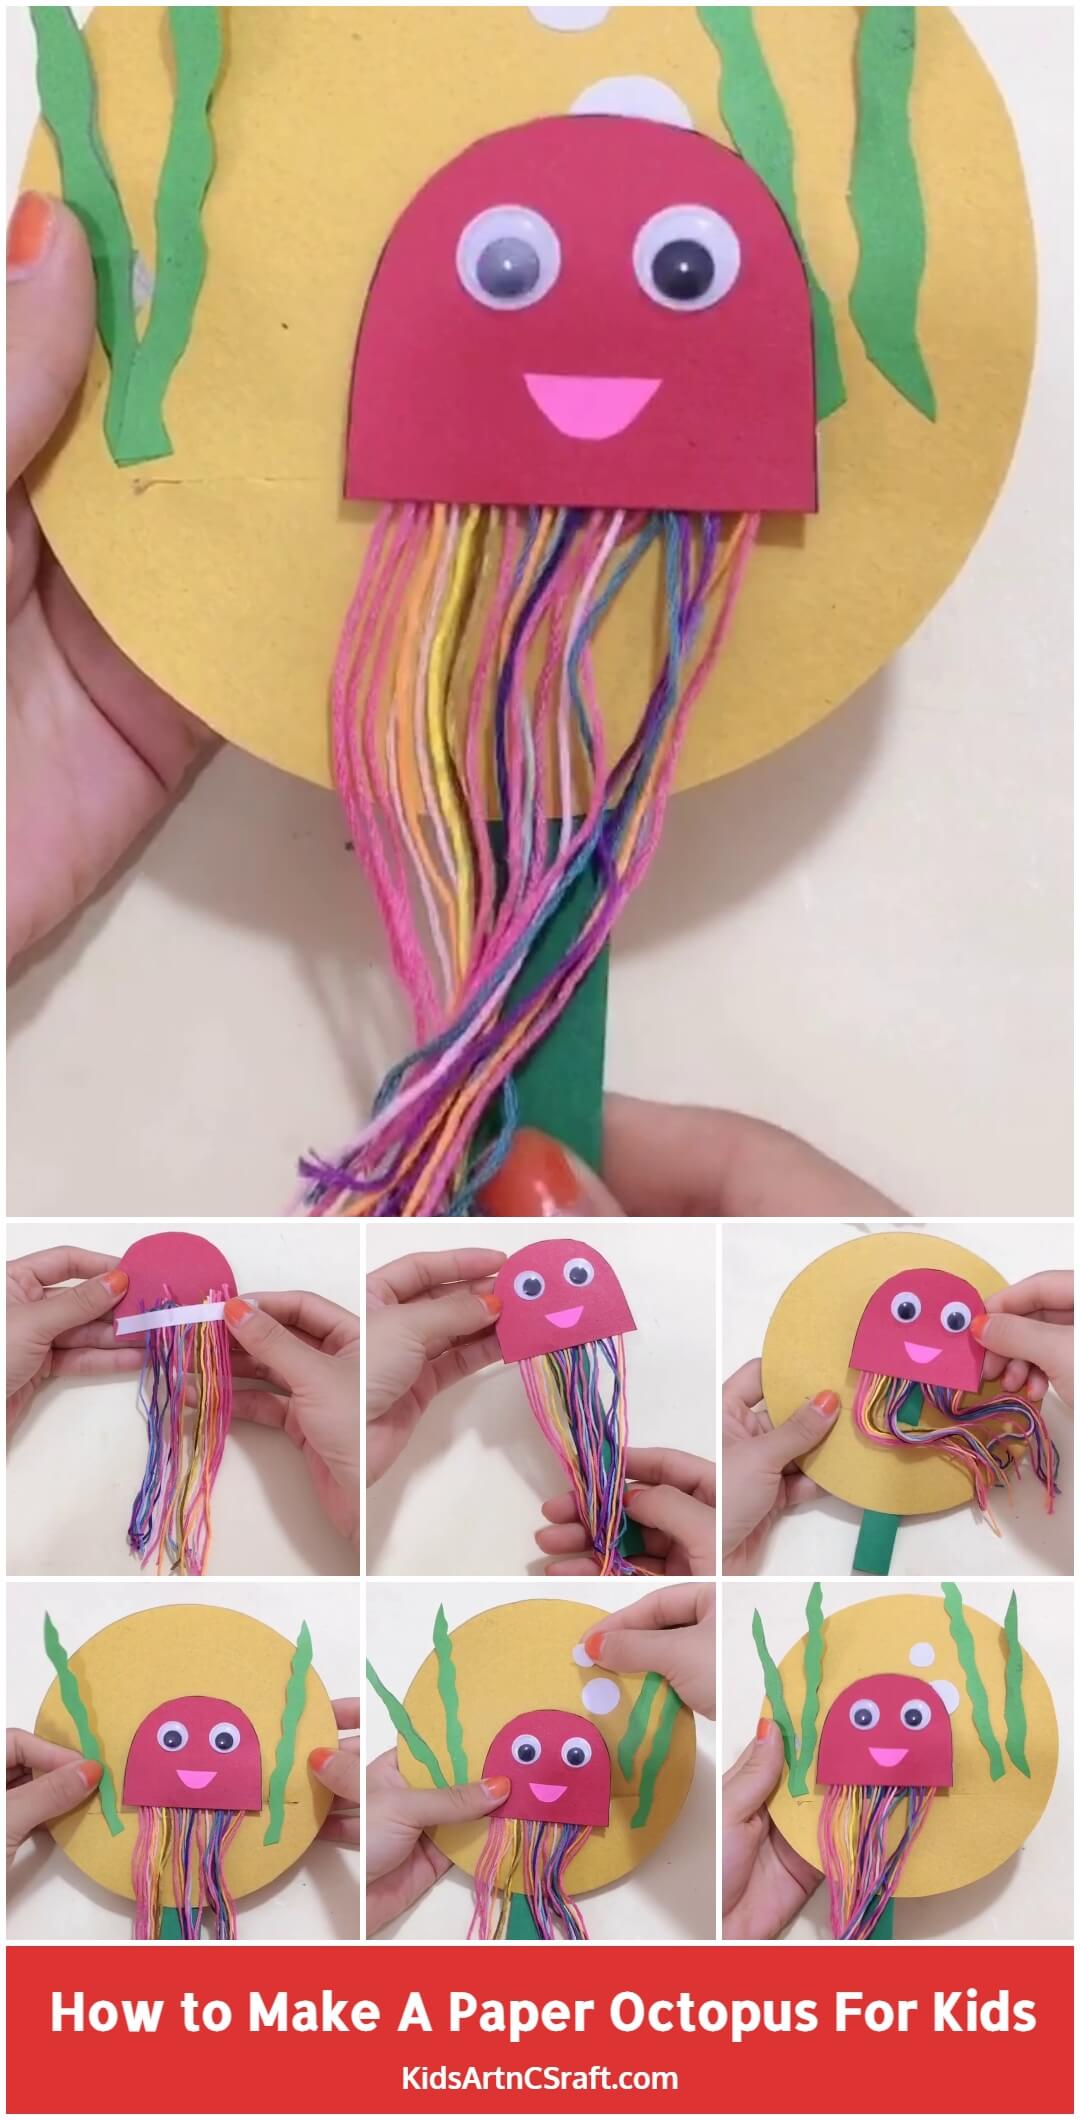 How to Make Paper Octopus For Kids-Step by Step Tutorial